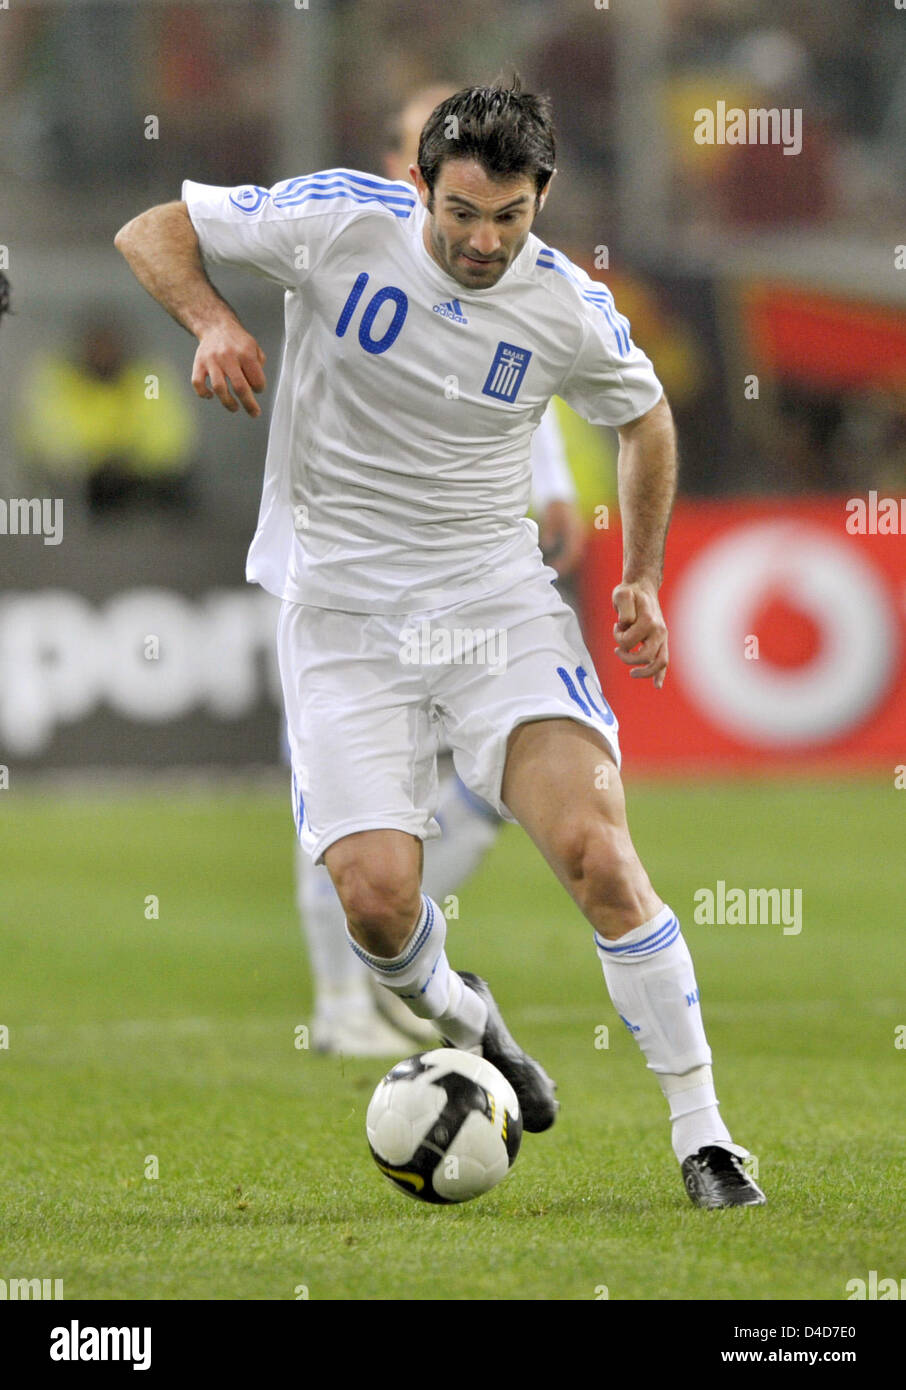 Greece's Georgios Karagounis is on the ball in the test cap Portugal v Greece at LTU Arena stadium in Duesseldorf, Germany, 26 March 2008. Greece defeated Portugal 2-1. Photo: Achim Scheidemann Stock Photo